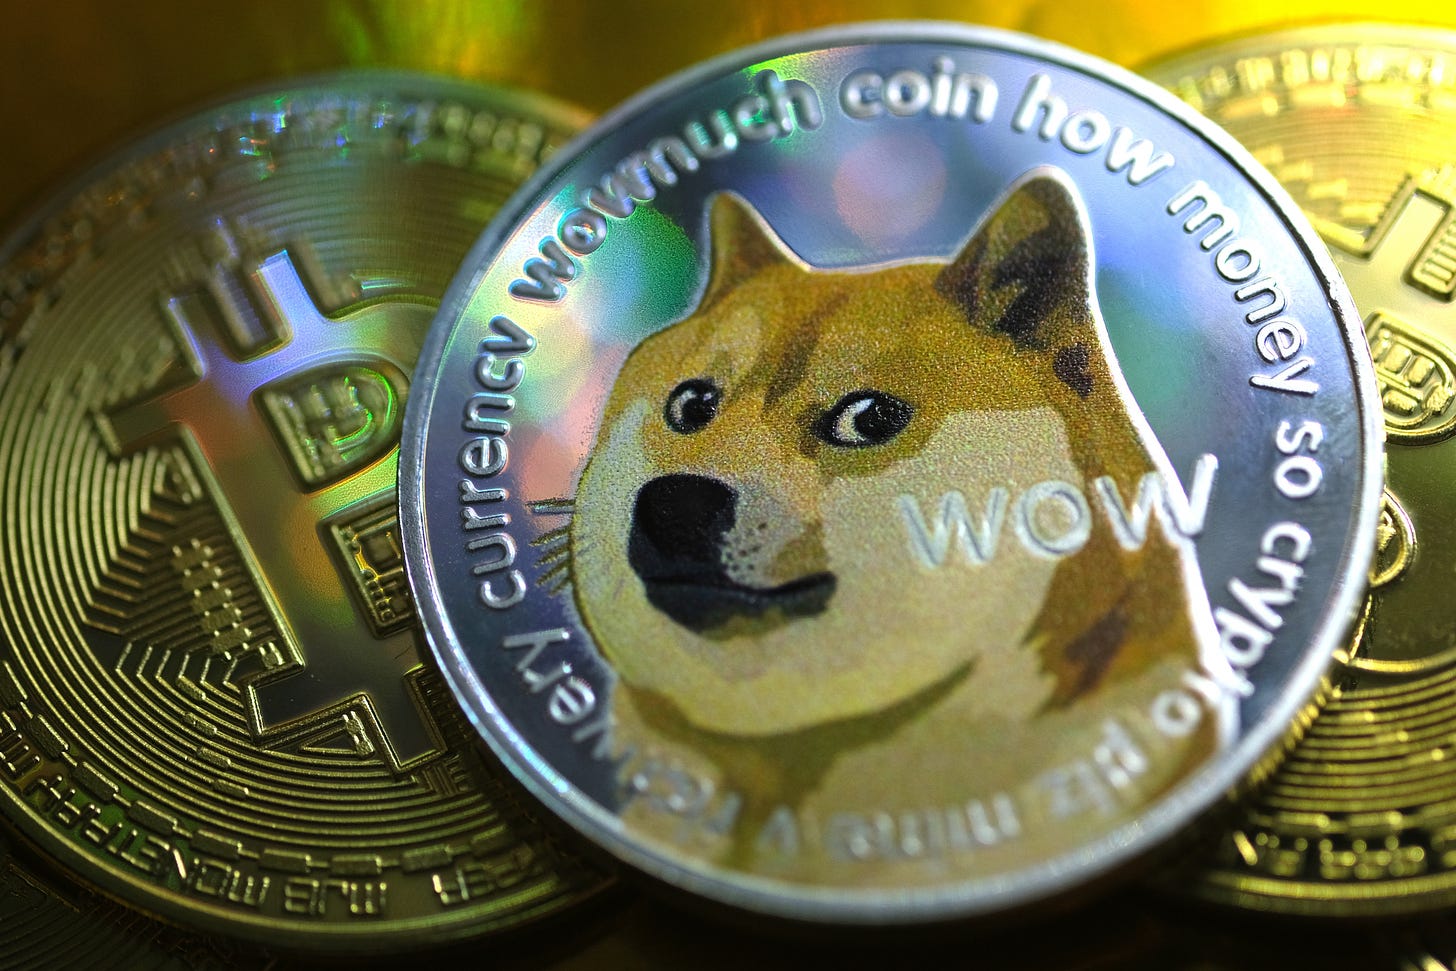 Petition Asking Amazon to Accept Dogecoin Signed by Almost 100,000 People